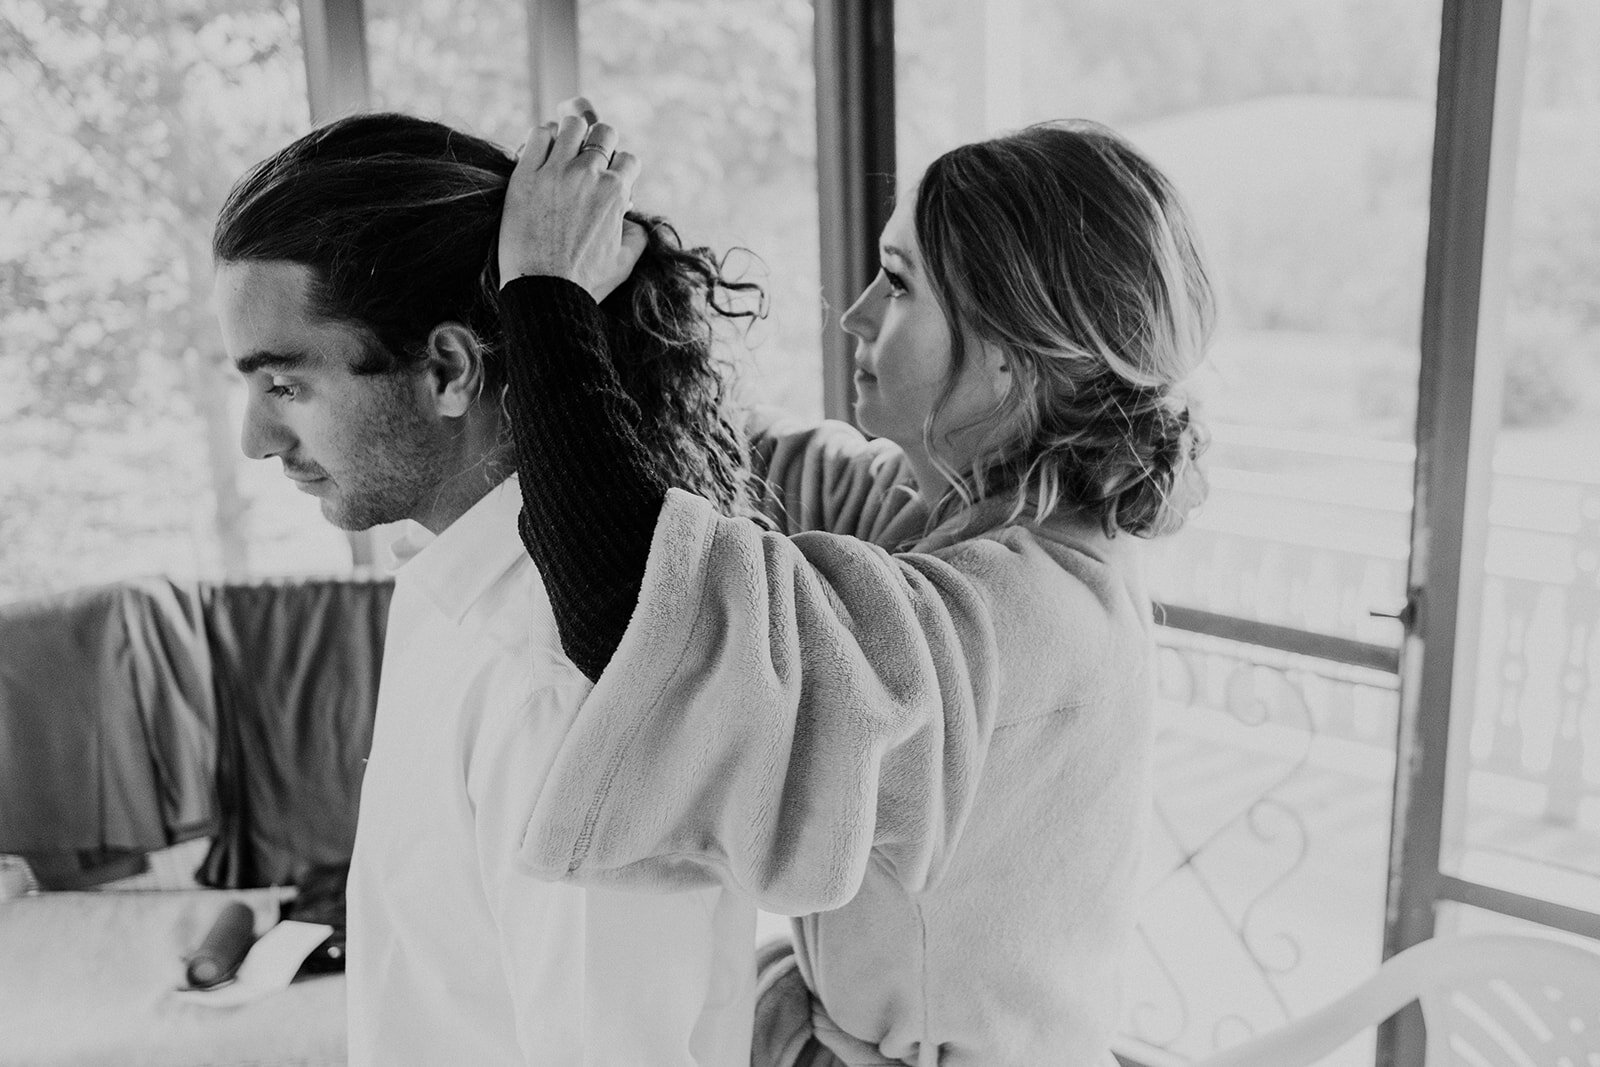 The sister of the bride helps her boyfriend do his hair before the outdoor farm wedding ceremony.